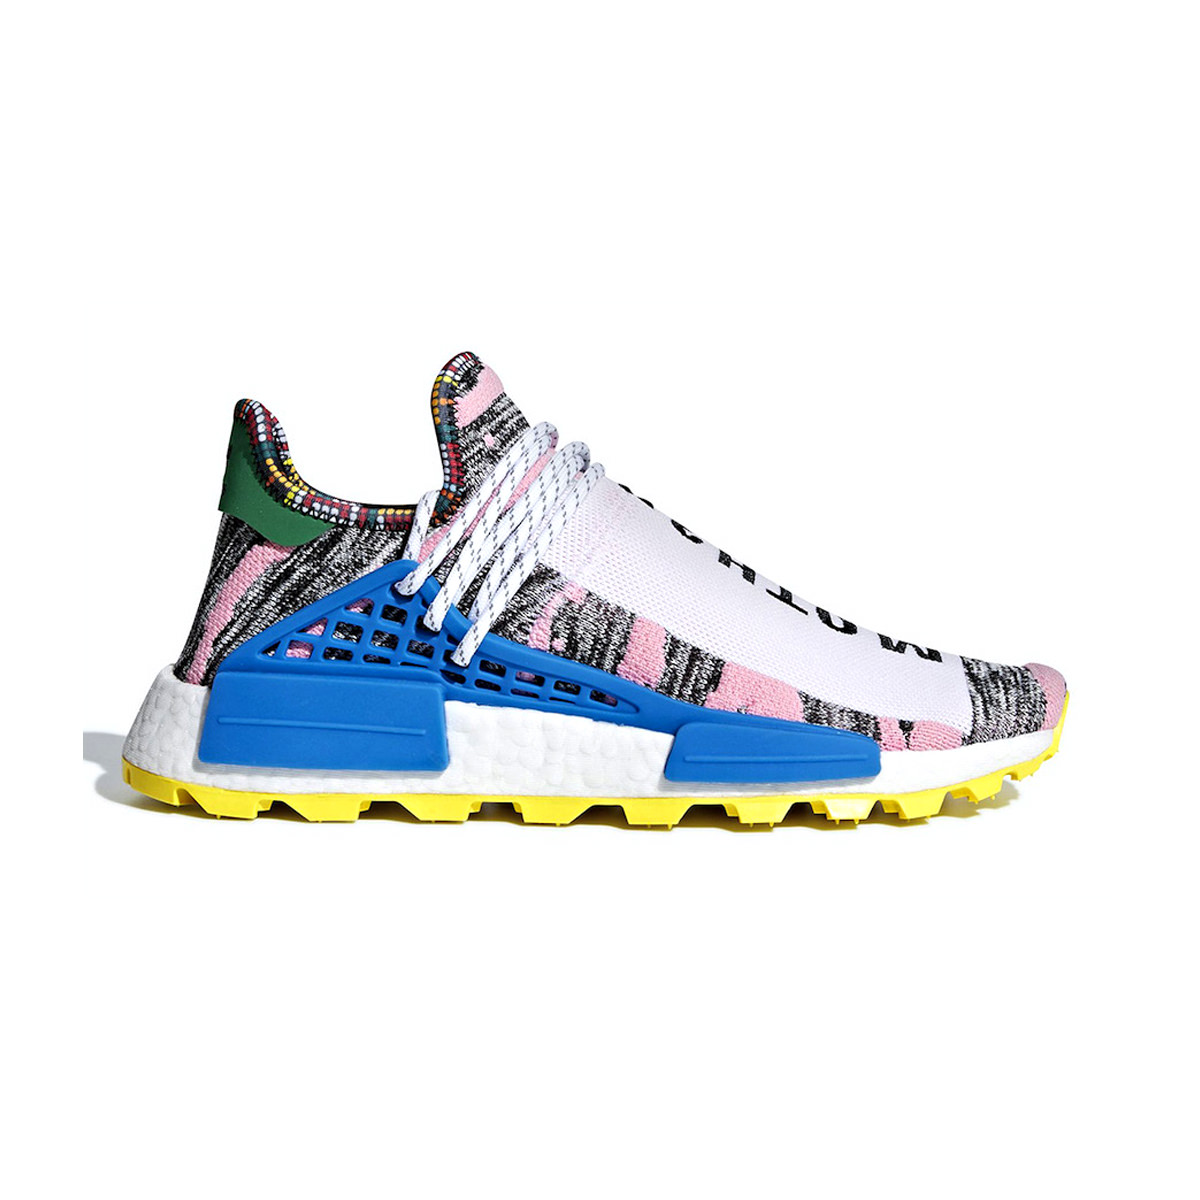 nmd hu solar pack mother